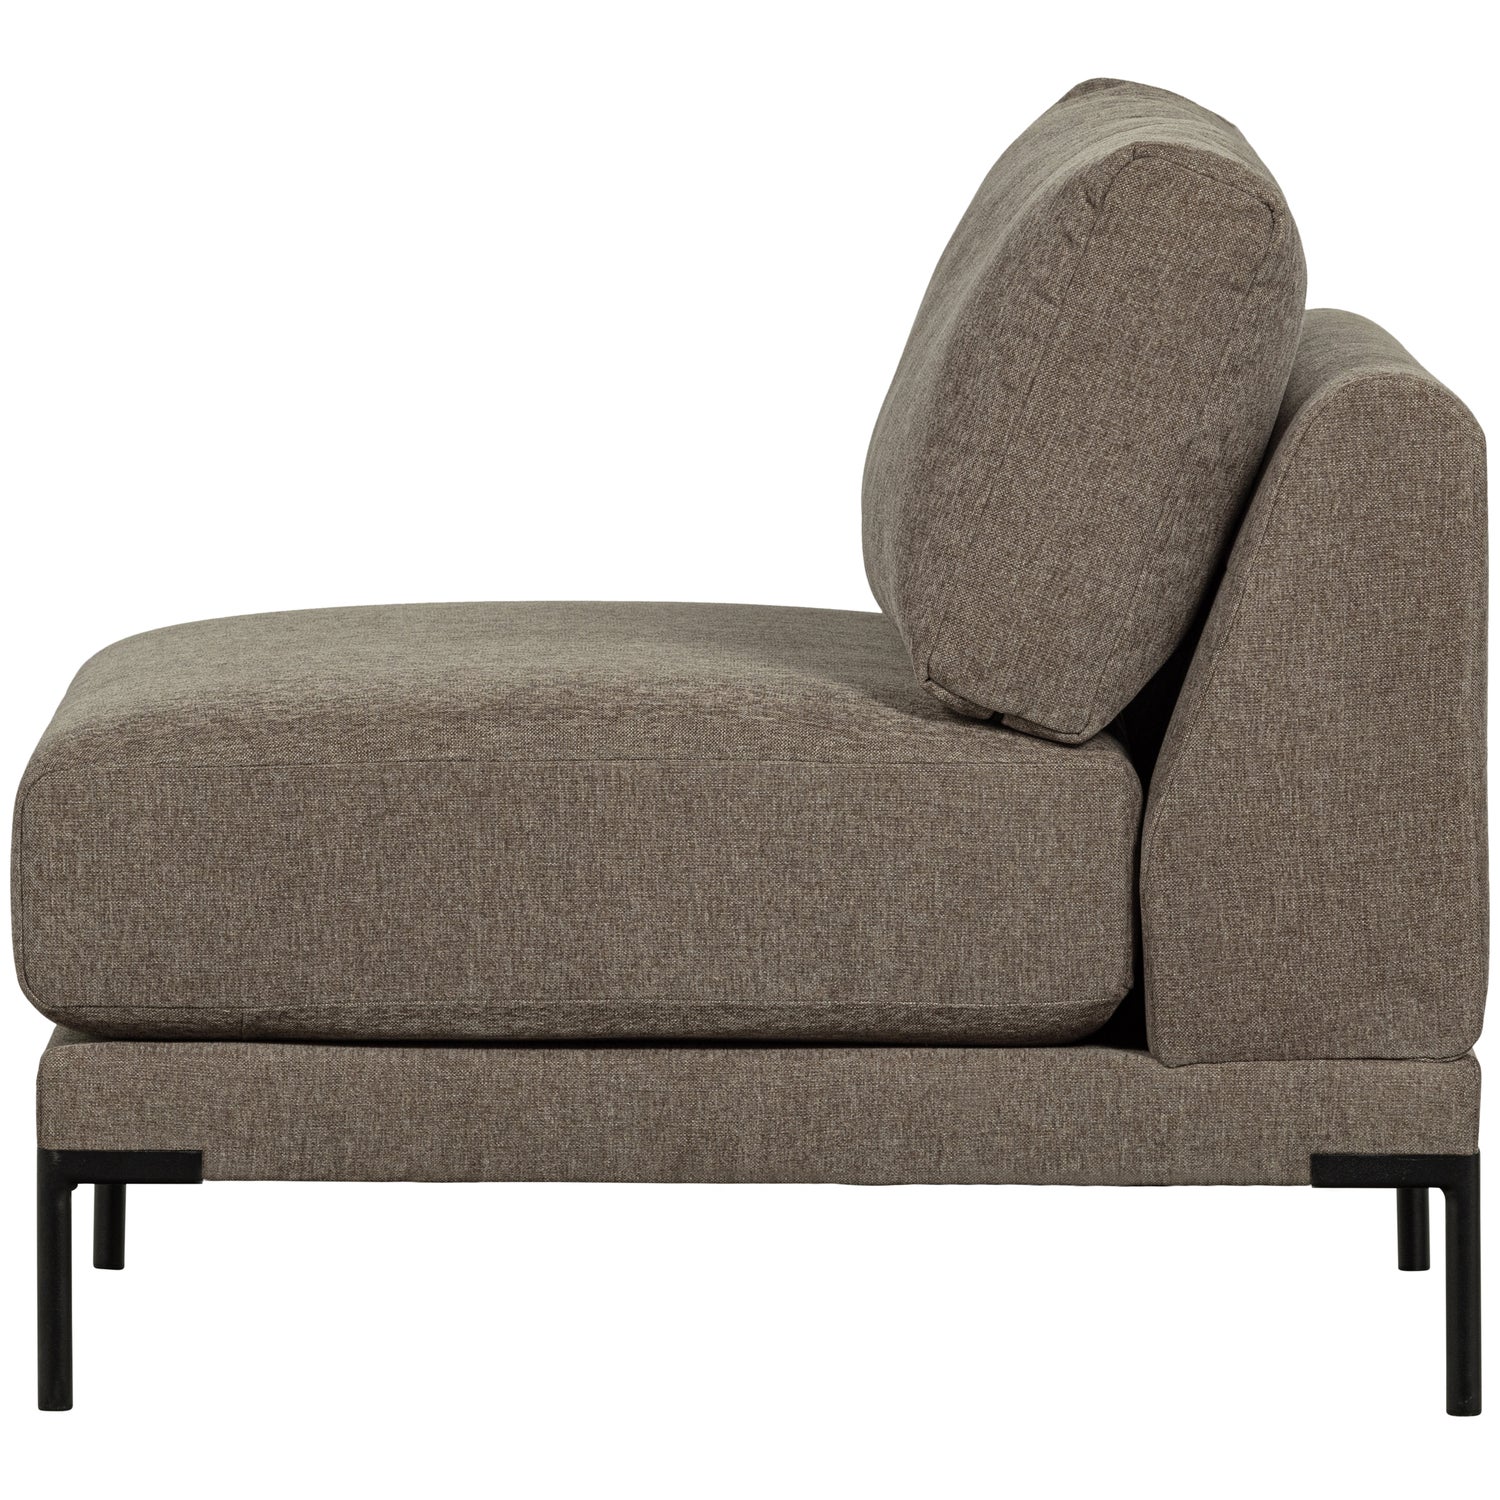 400486-T-03_VS_VT_Couple_loveseat_taupe.jpg?auto=webp&format=png&width=1500&height=1500